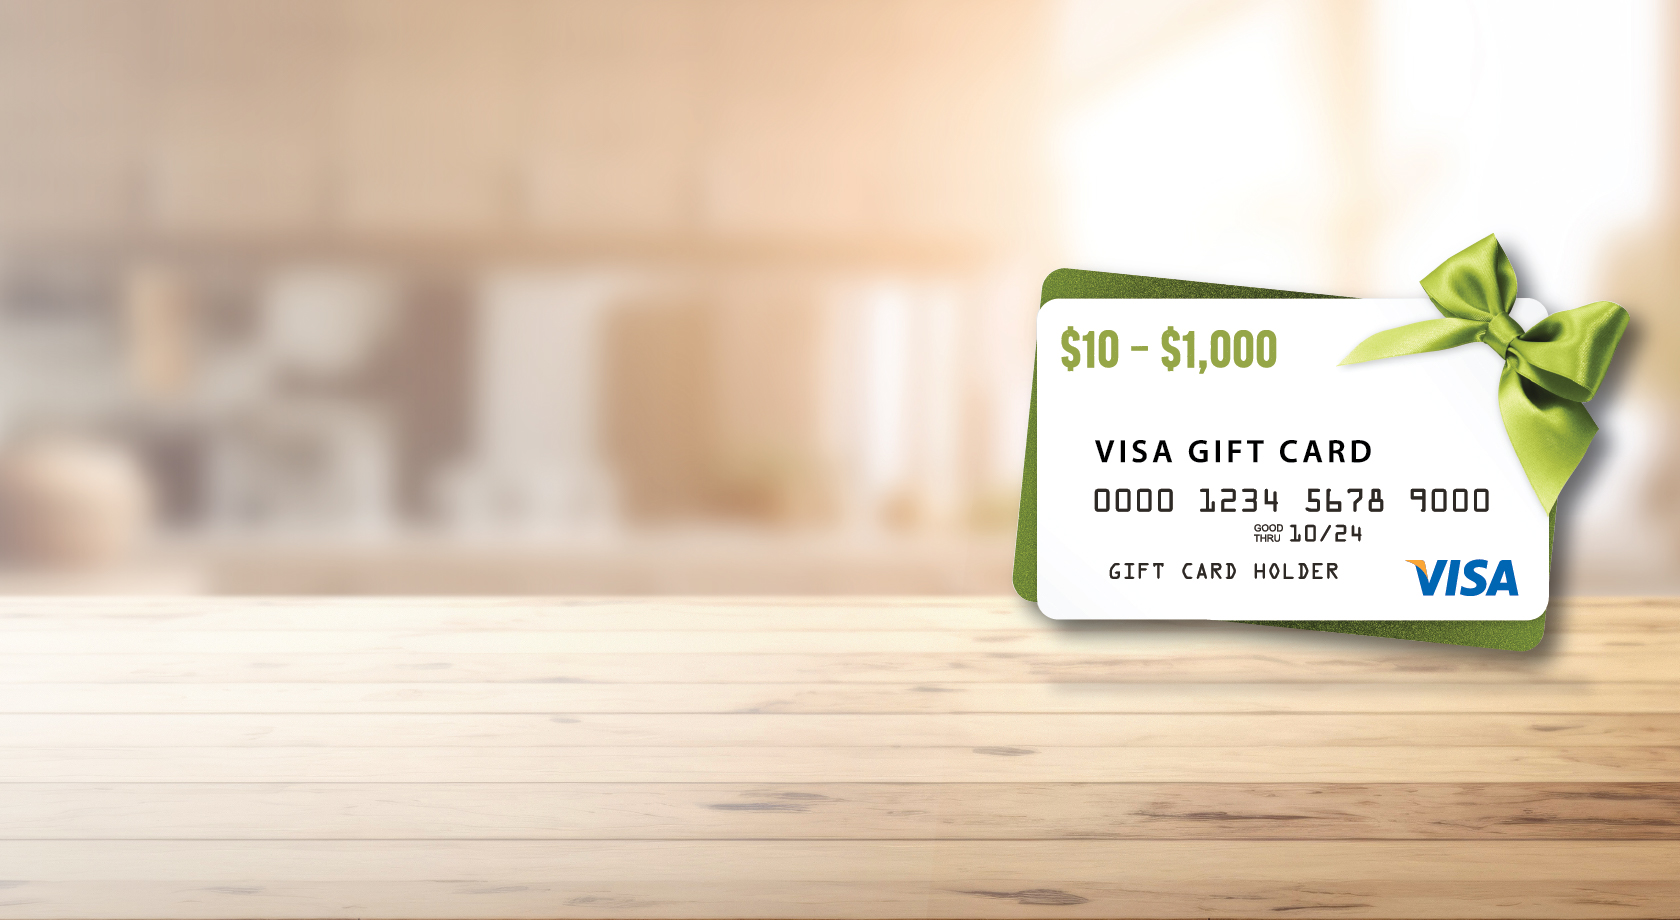 The perfect gift for moms, dads, & grads. No-fee Visa gift cards. Load from $10 to $1,000. 